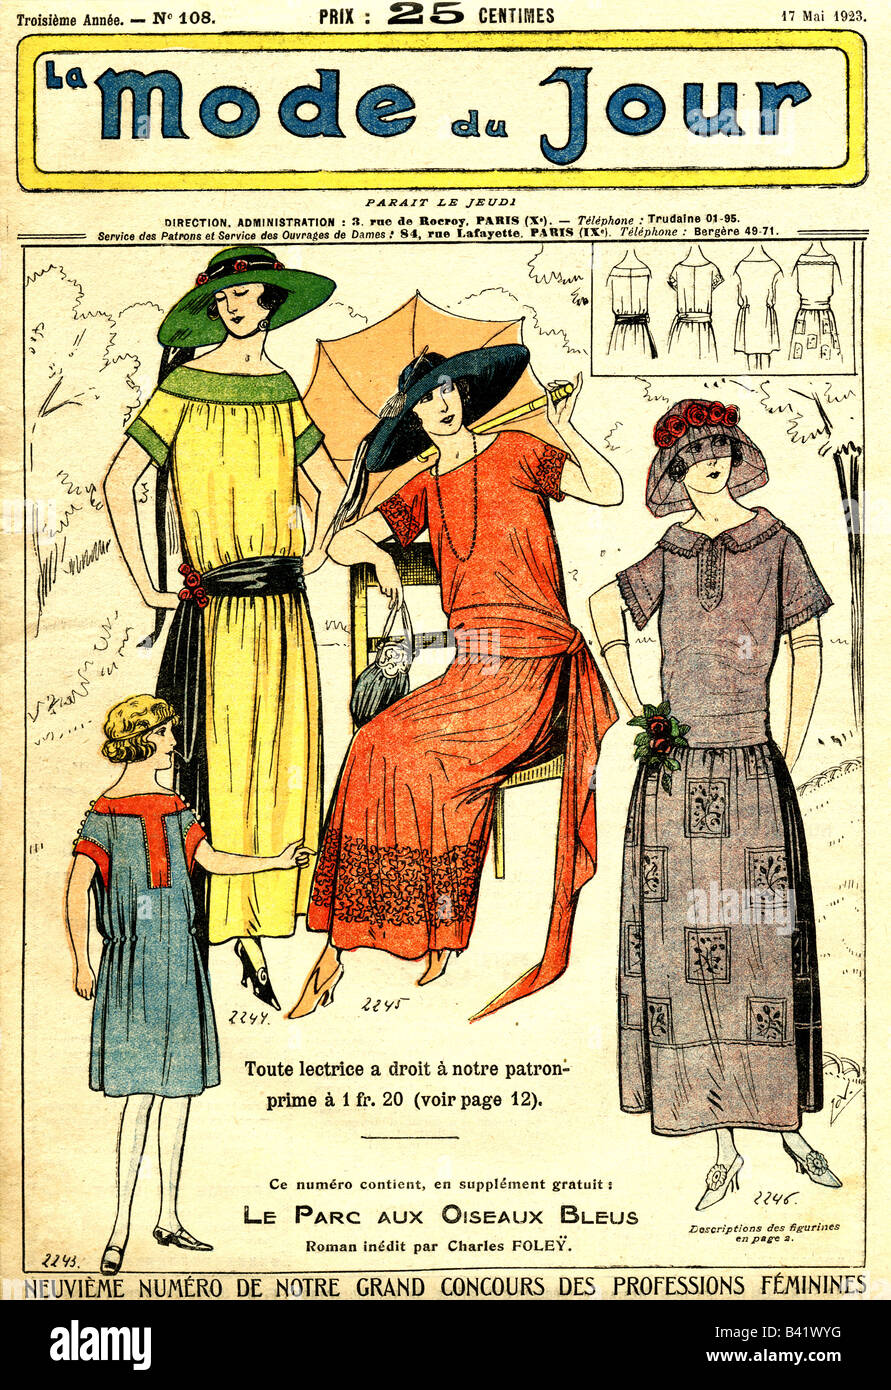 La Mode du Jour French fashion magazine 17 May 1923 FOR EDITORIAL USE ONLY Stock Photo